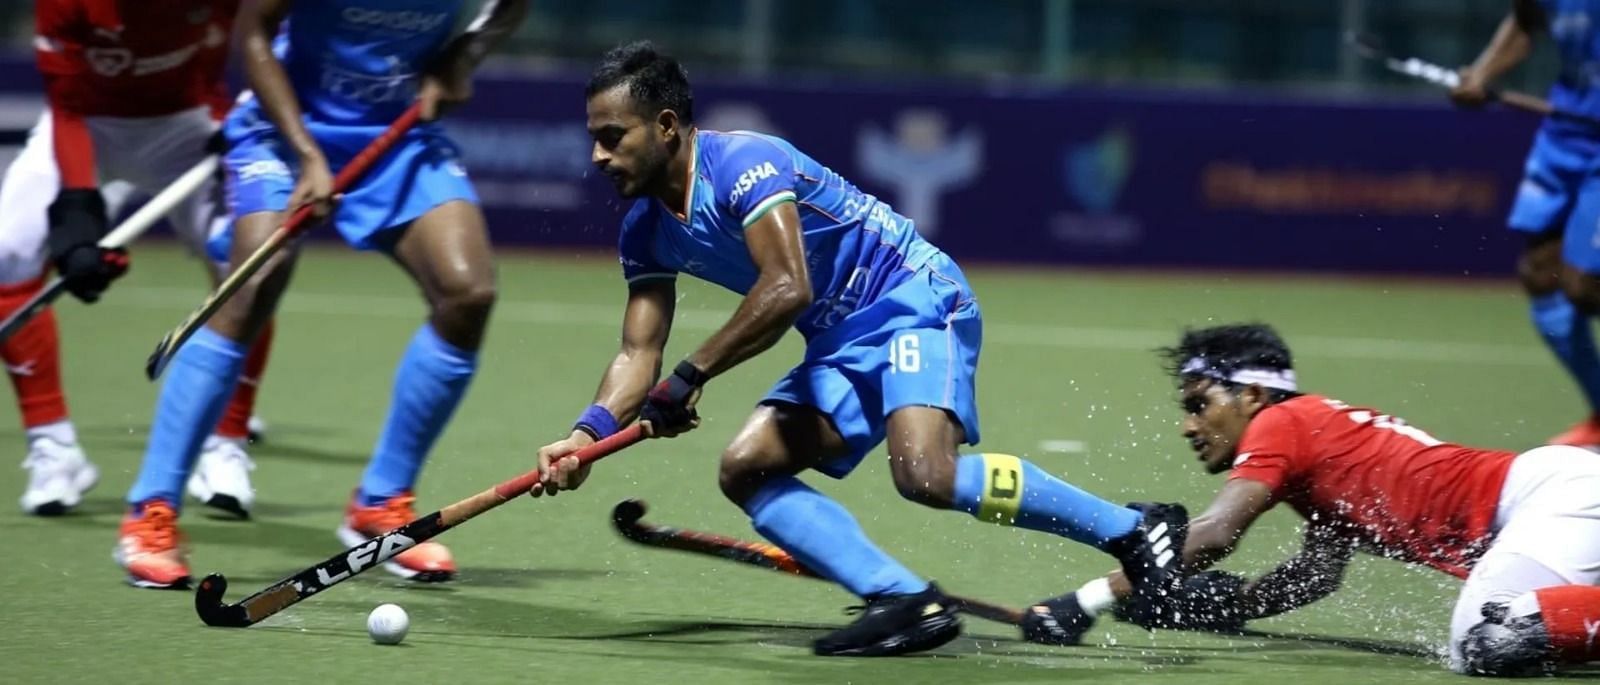 Indian team captain Uttam Singh in action (Pic Credits: Hockey India)